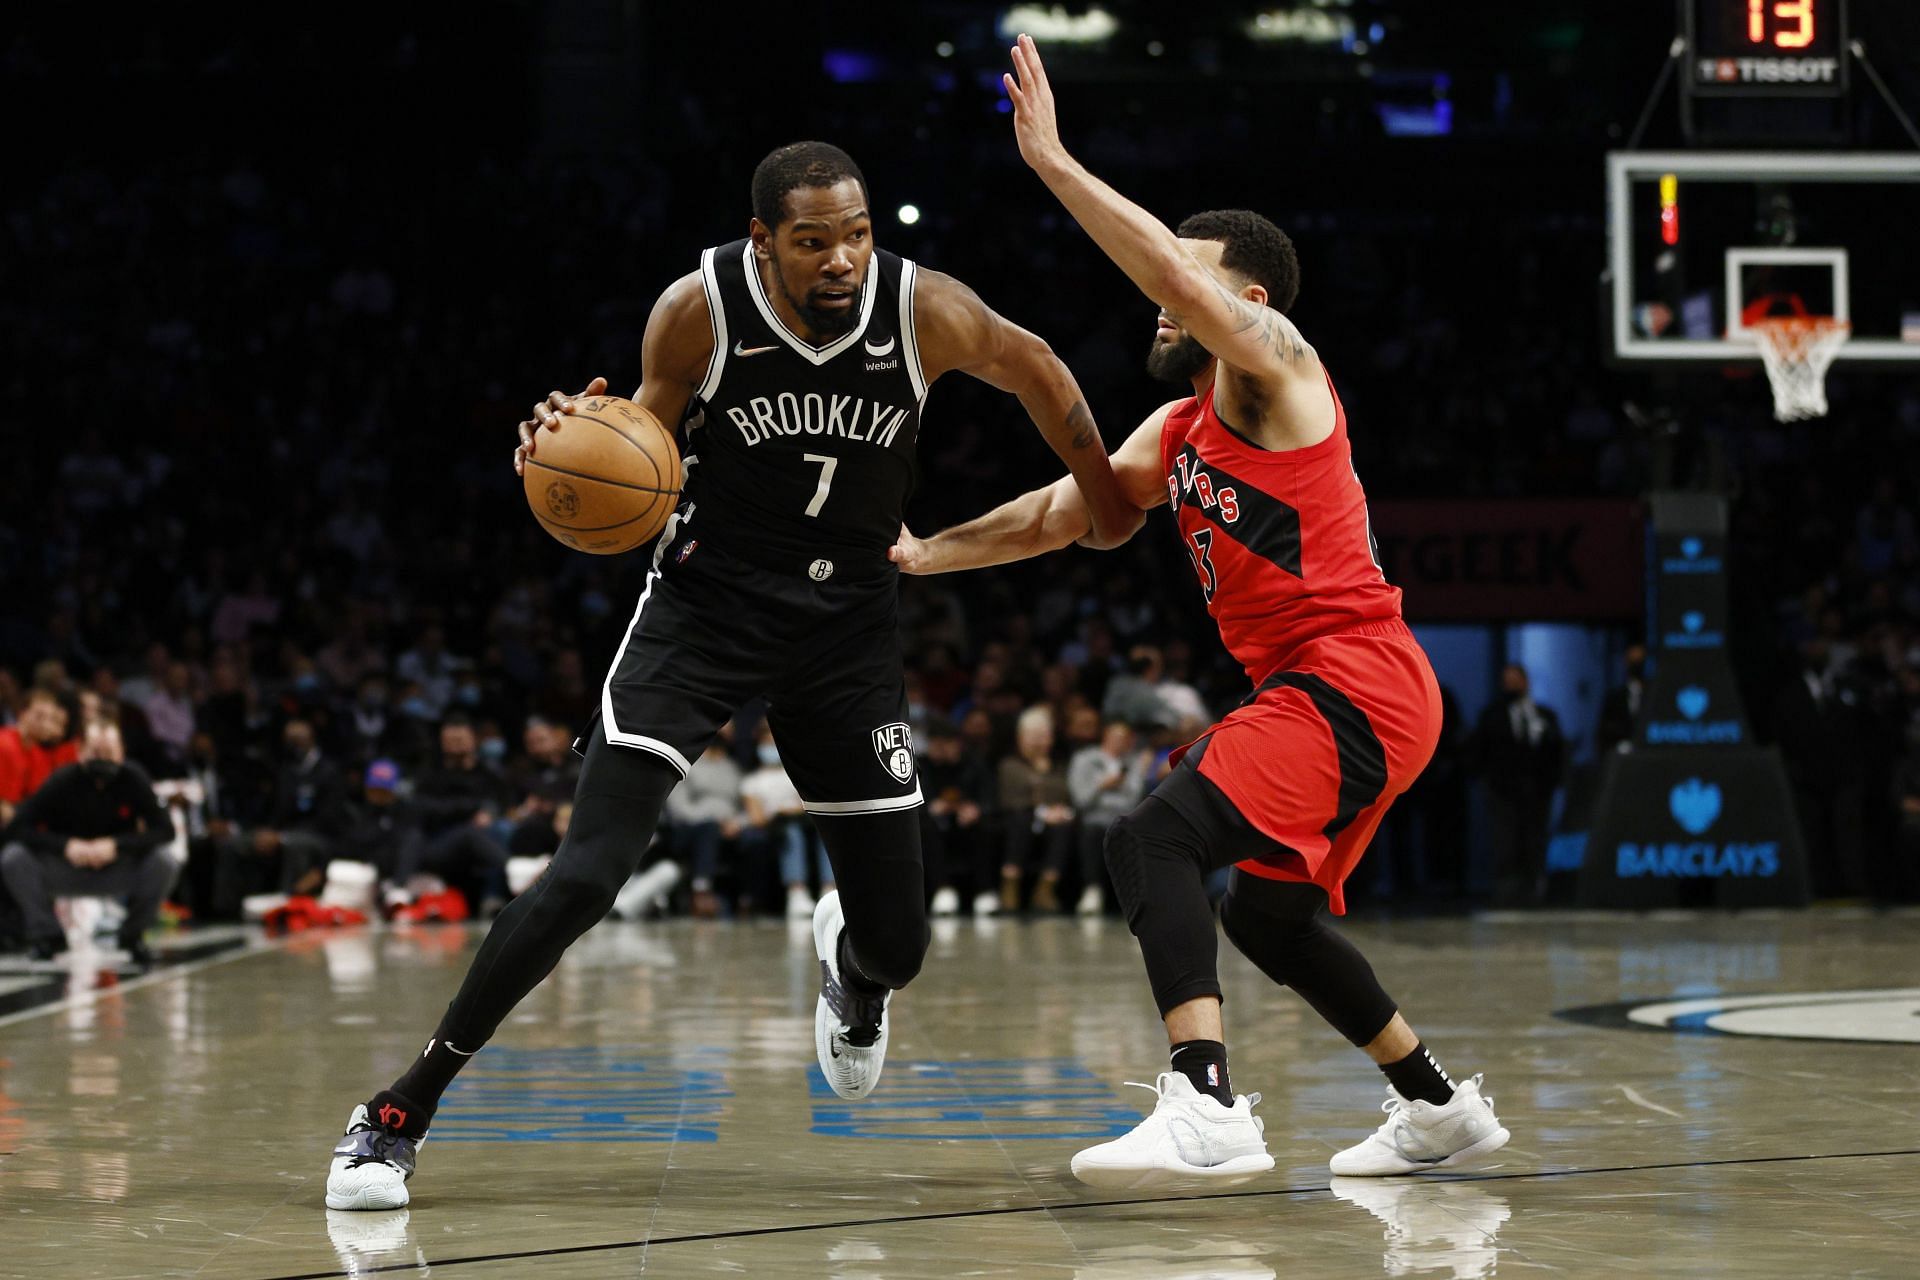 Kevin Durant of the Brooklyn Nets dribbles as Fred VanVleet of the Toronto Raptors defends during the first half at Barclays Center on Dec. 14, 2021, in the Brooklyn borough of New York City.